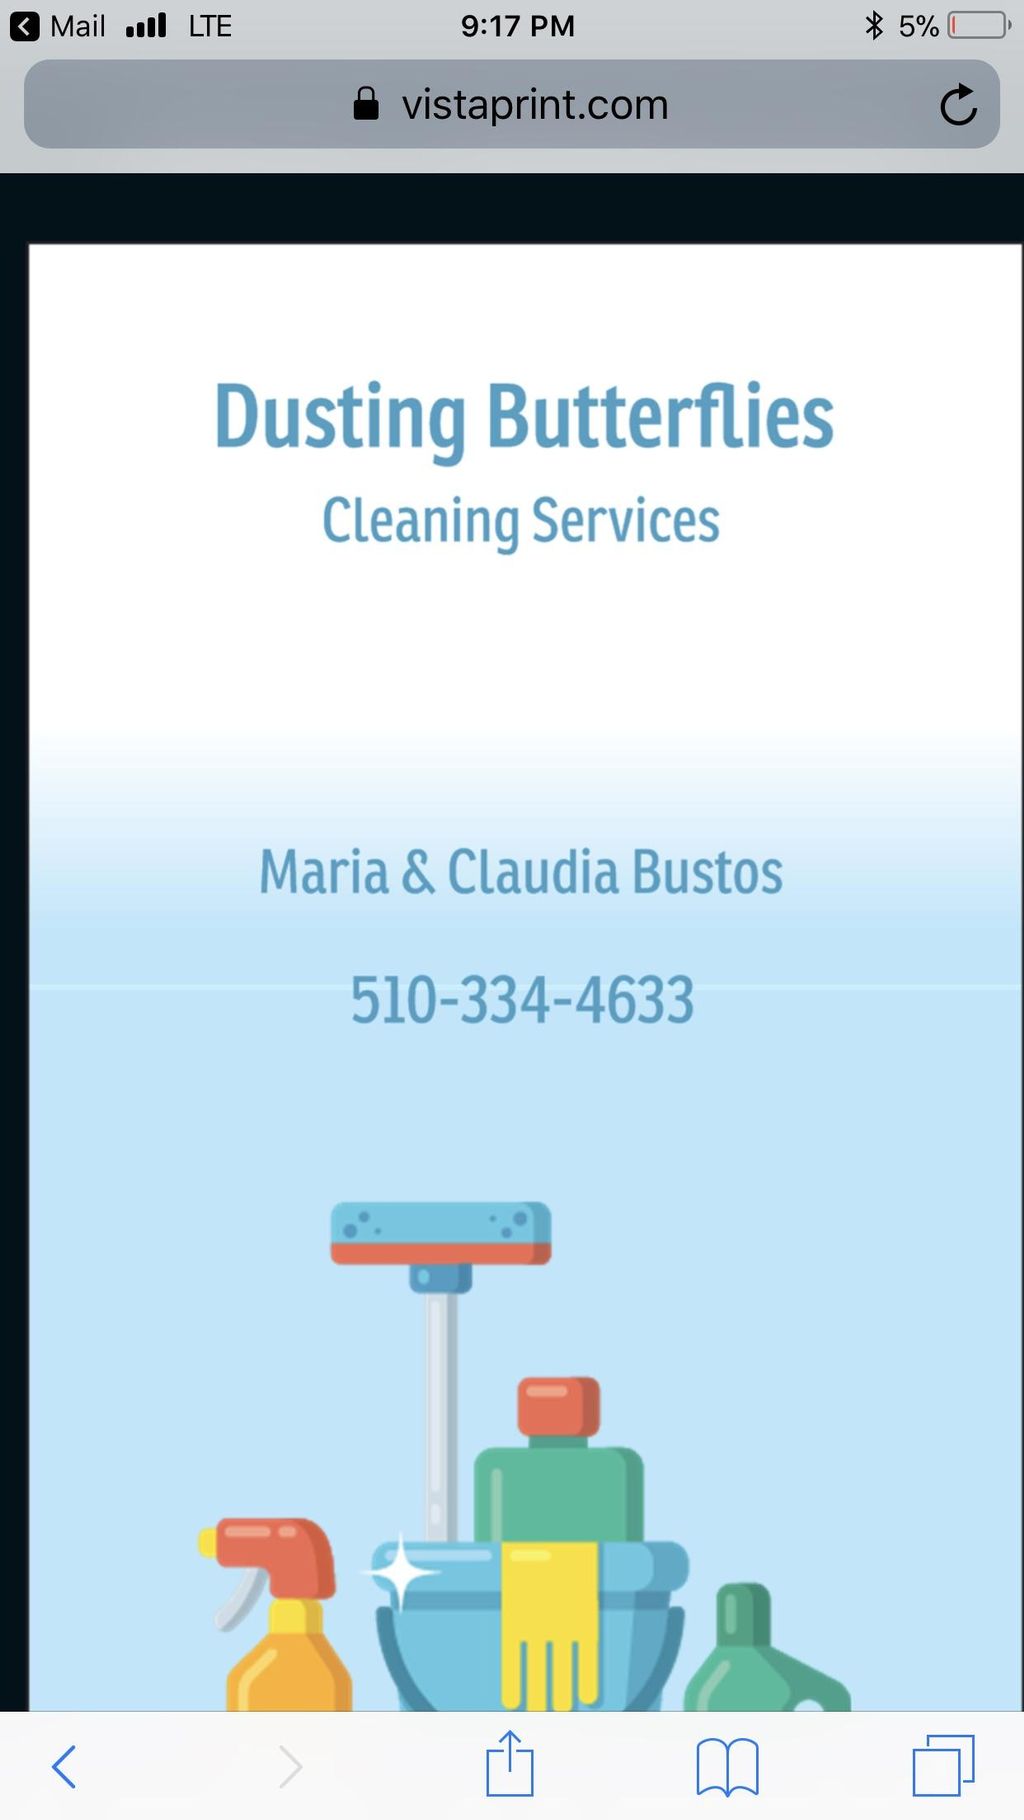 Dusting Butterflies Cleaning Services